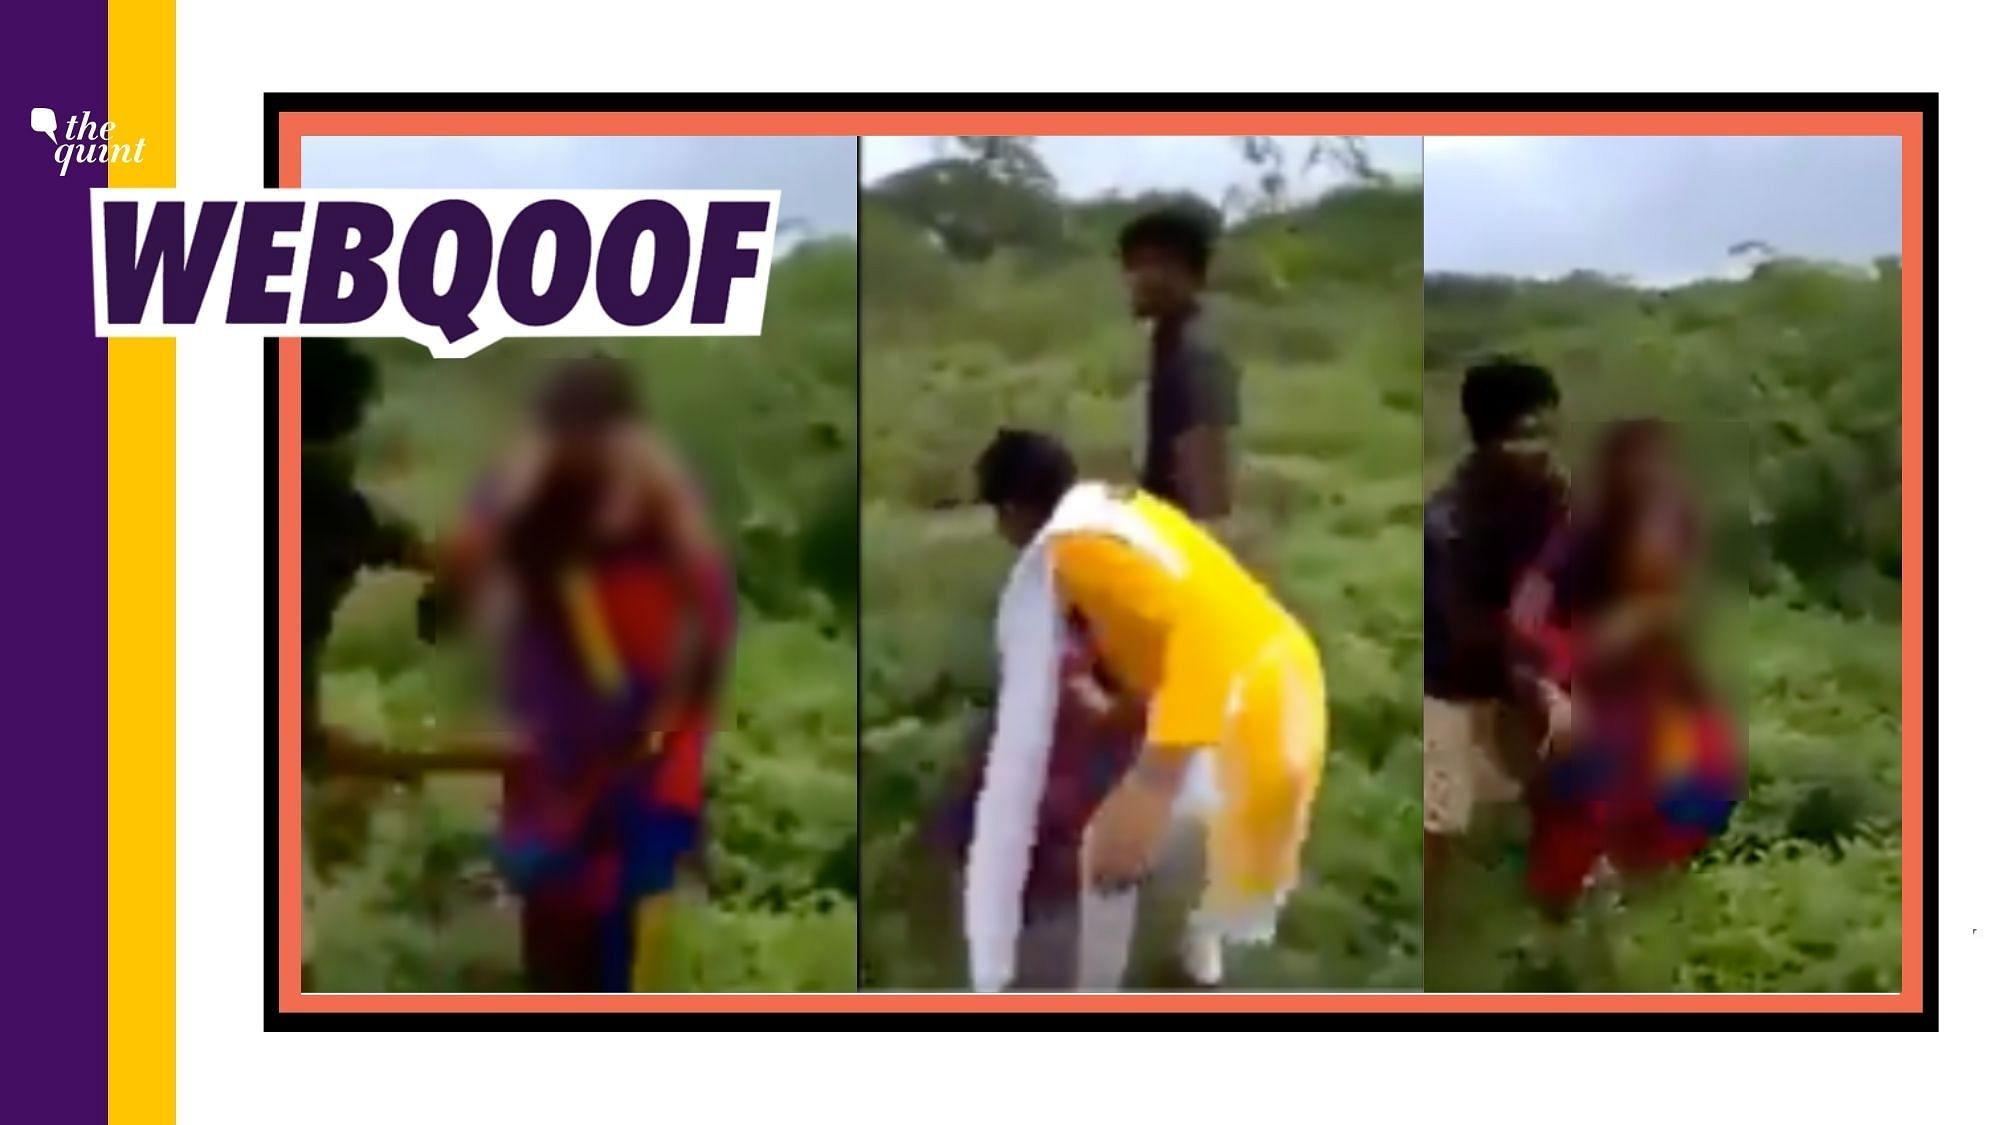 An old incident has been revived with the false claim that it took place in Kerala, when in reality, the video is from Andhra Pradesh.